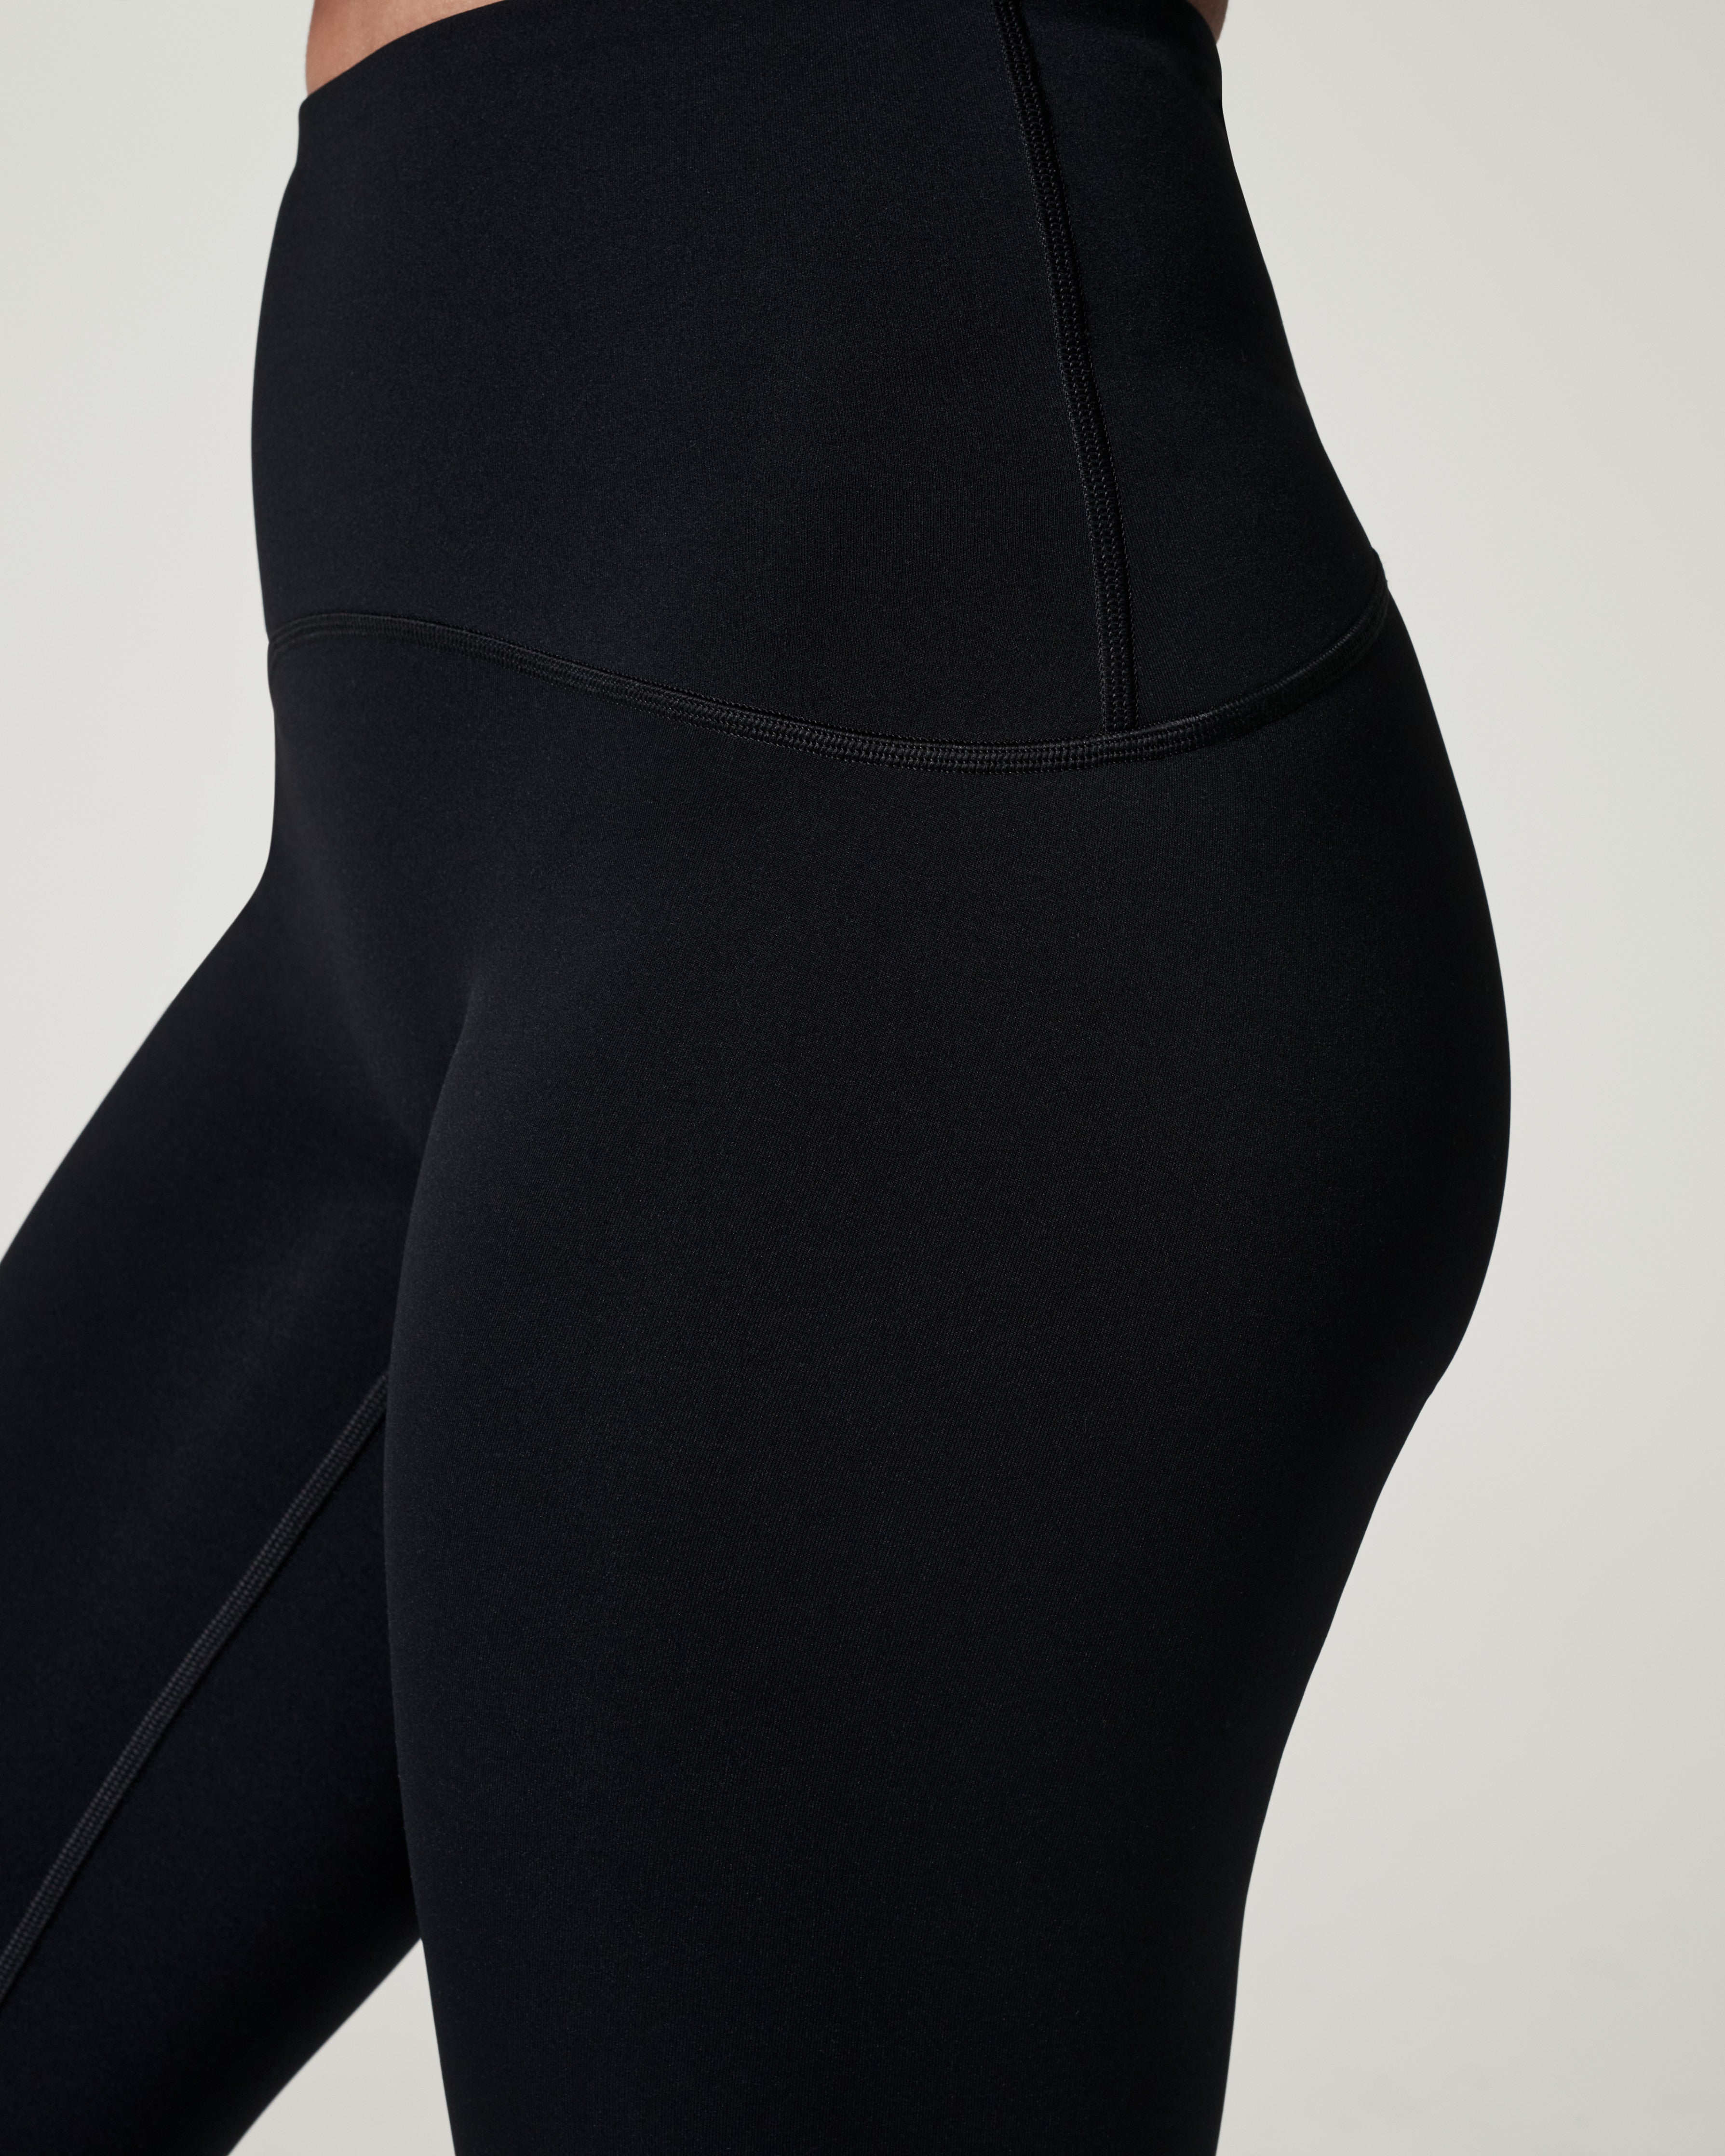 Buy Spanx Spanx Booty Boost Active 7/8 Leggings - Bark At 30% Off